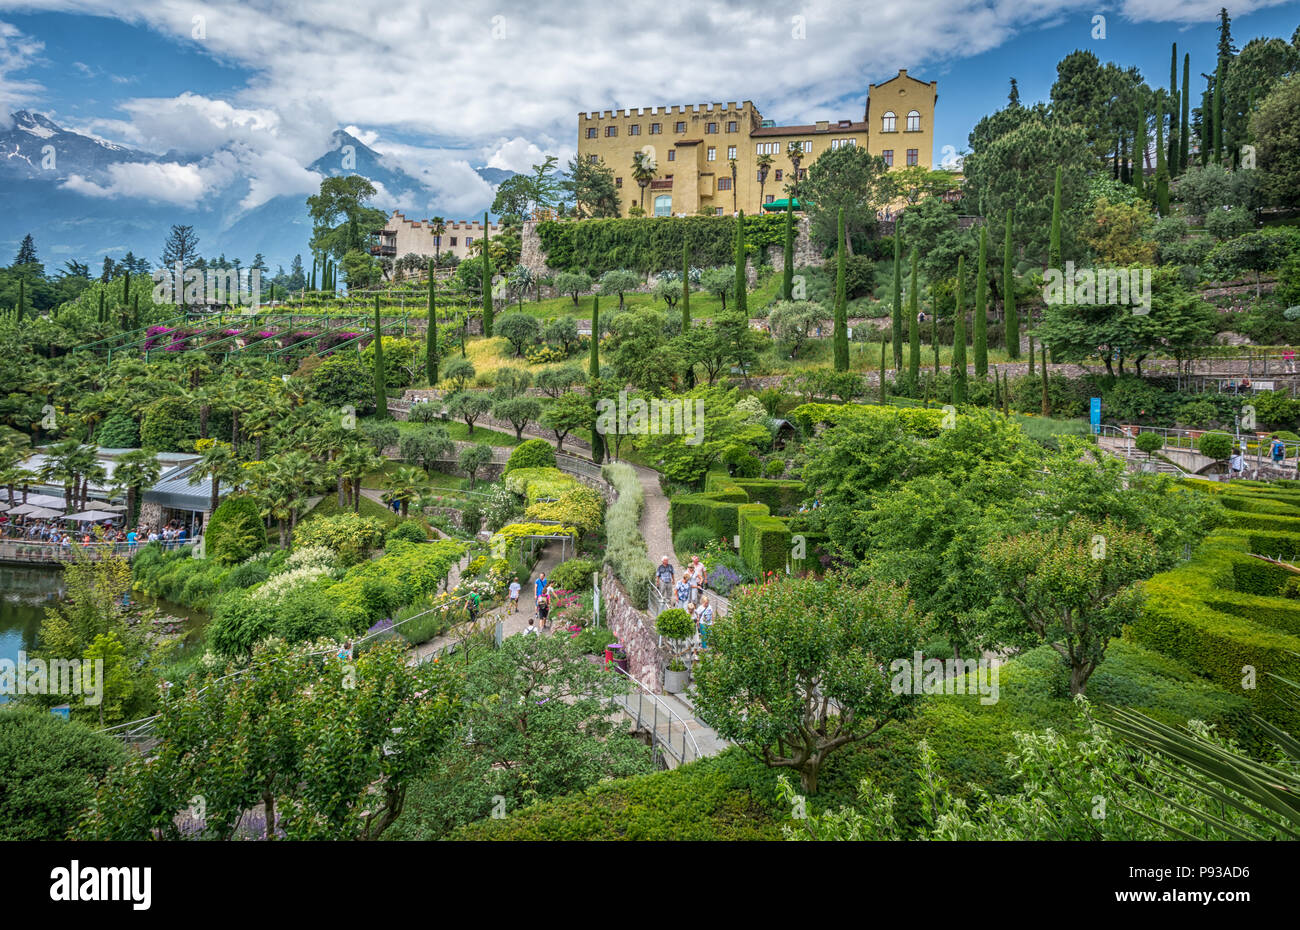 The Gardens of Trauttmansdorff Castle, Meran (Merano),South tyrol, Italy,offer many attractions with botanical species and varieties of plants. Stock Photo